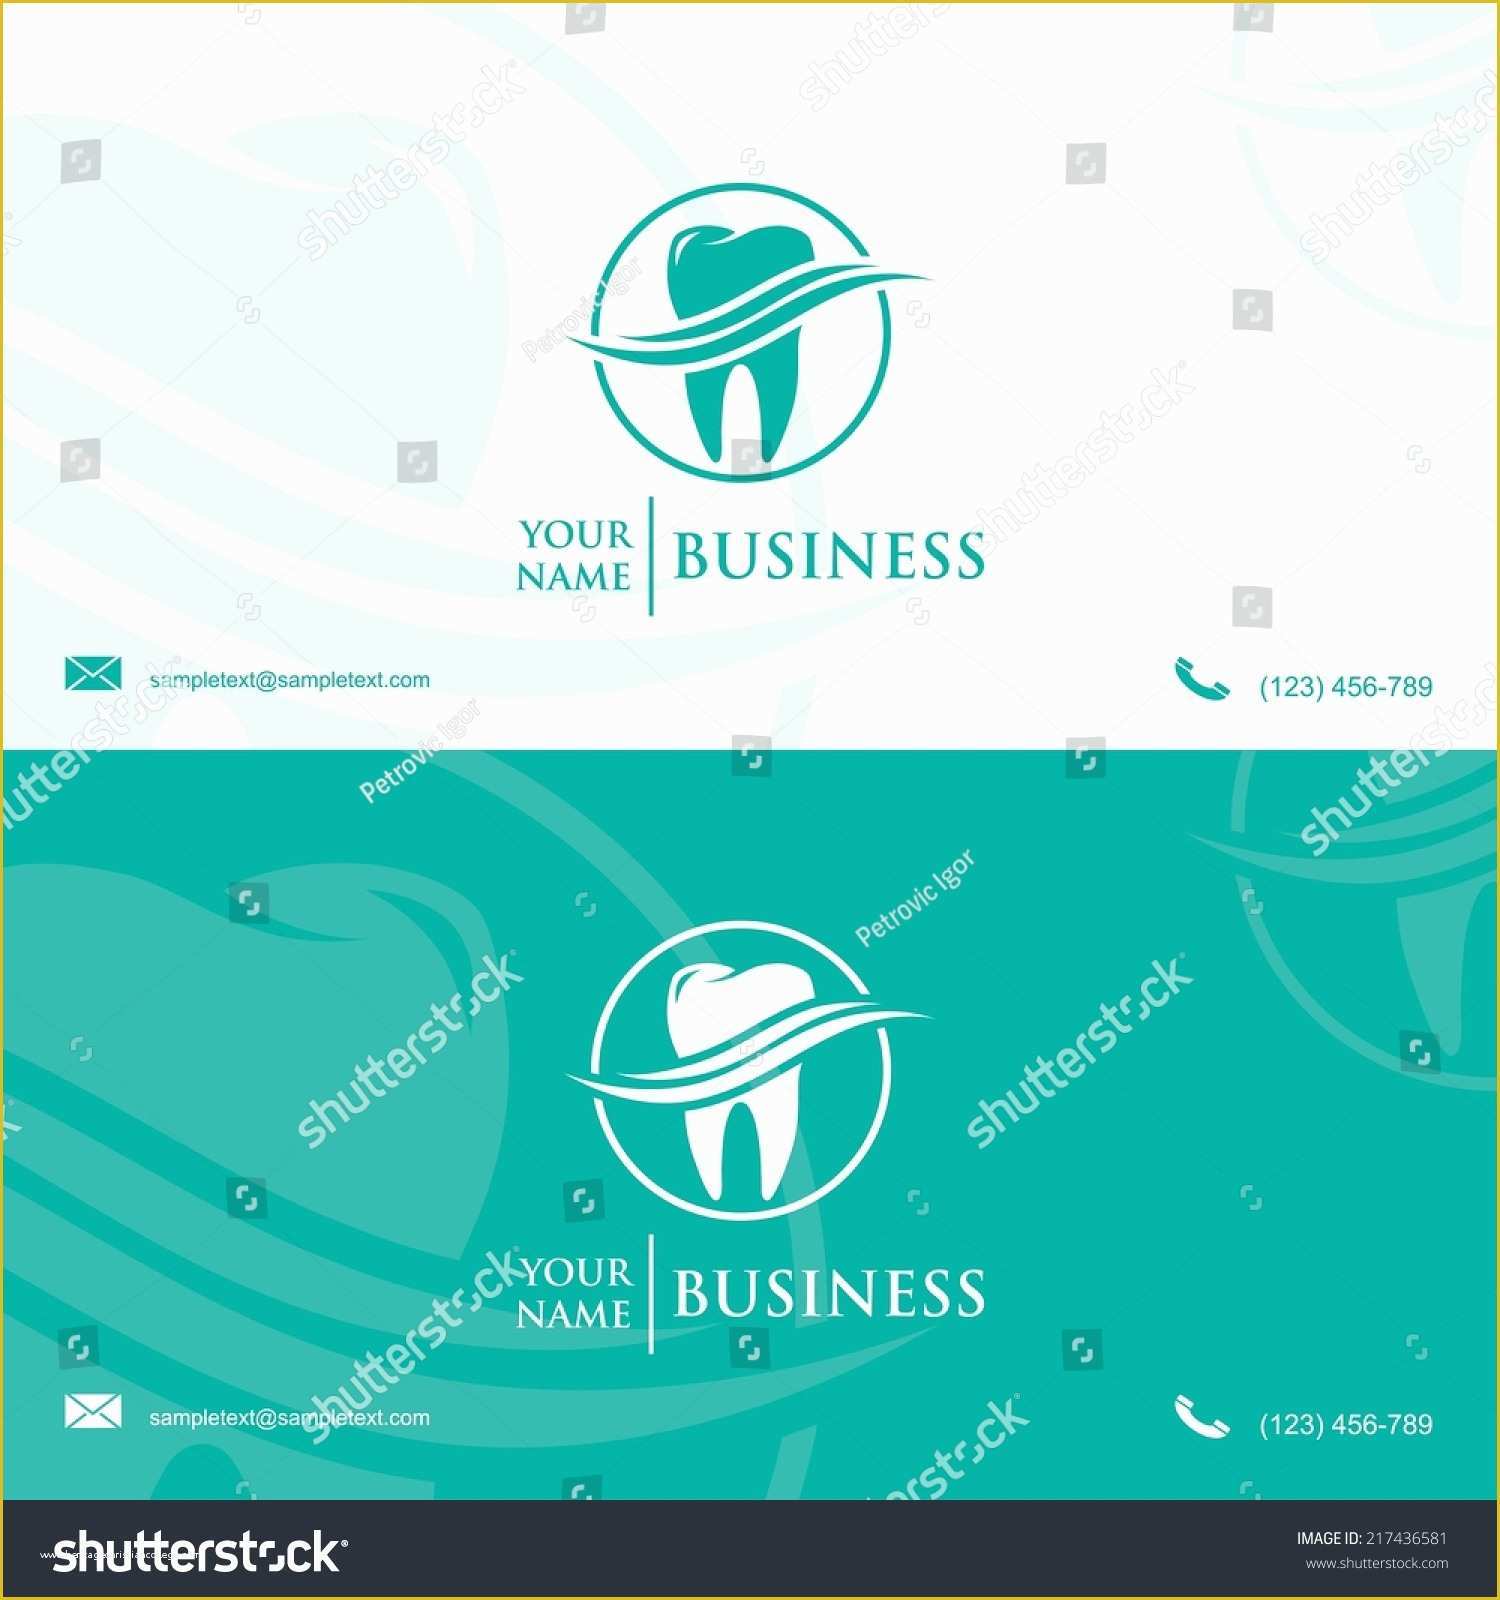 Dentist Business Card Template Free Of Dental Business Card Template Vector Illustration